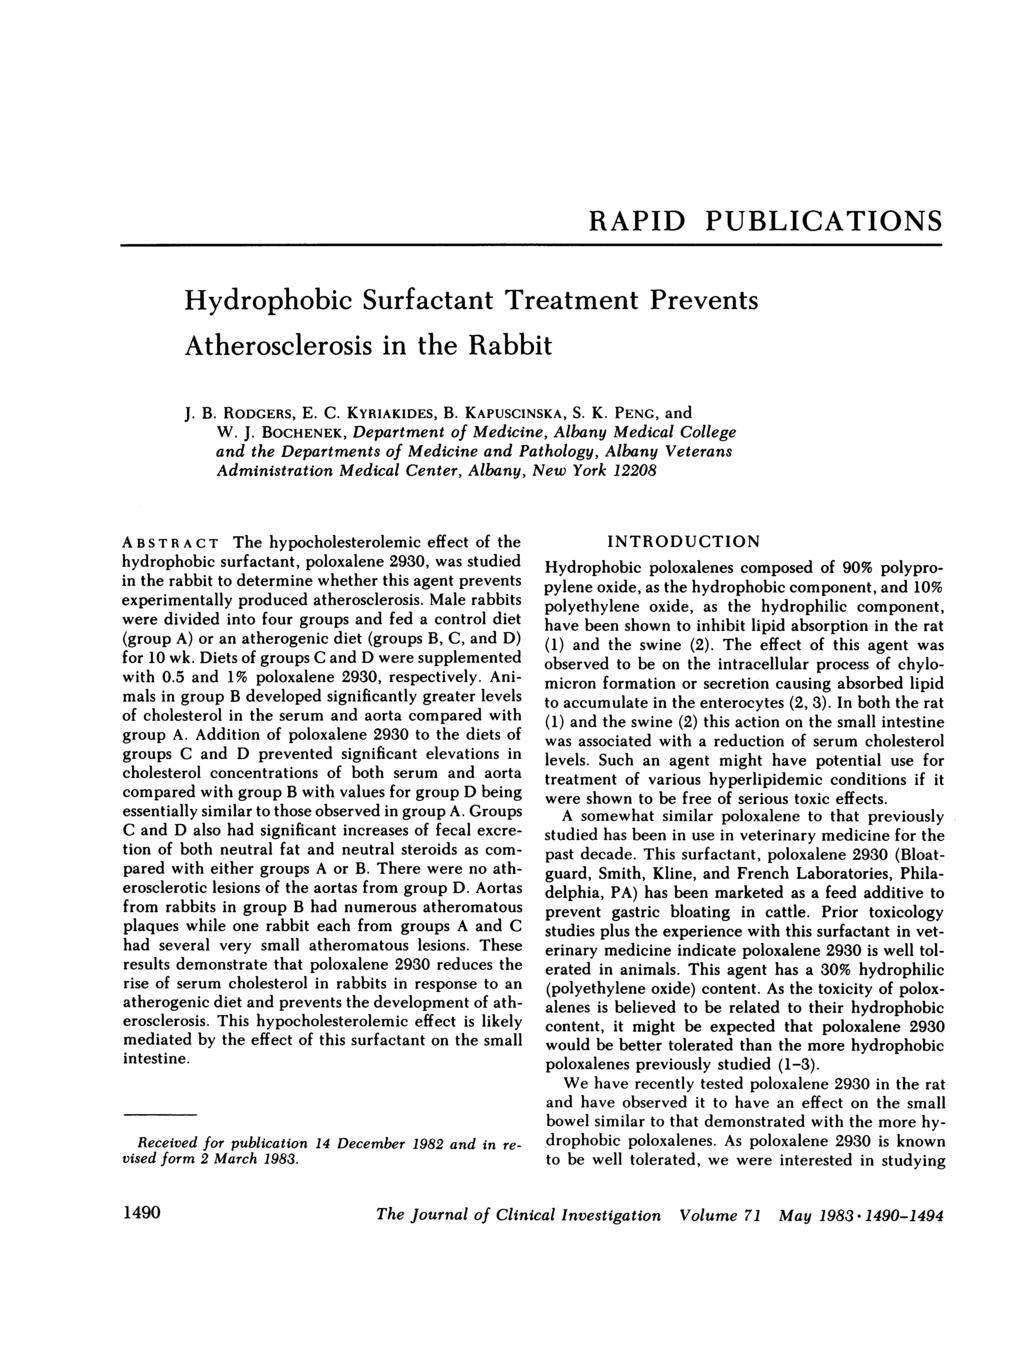 Hydrophobic Surfactant Treatment Prevents Atherosclerosis in the Rabbit RAPID PUBLICATIONS J.